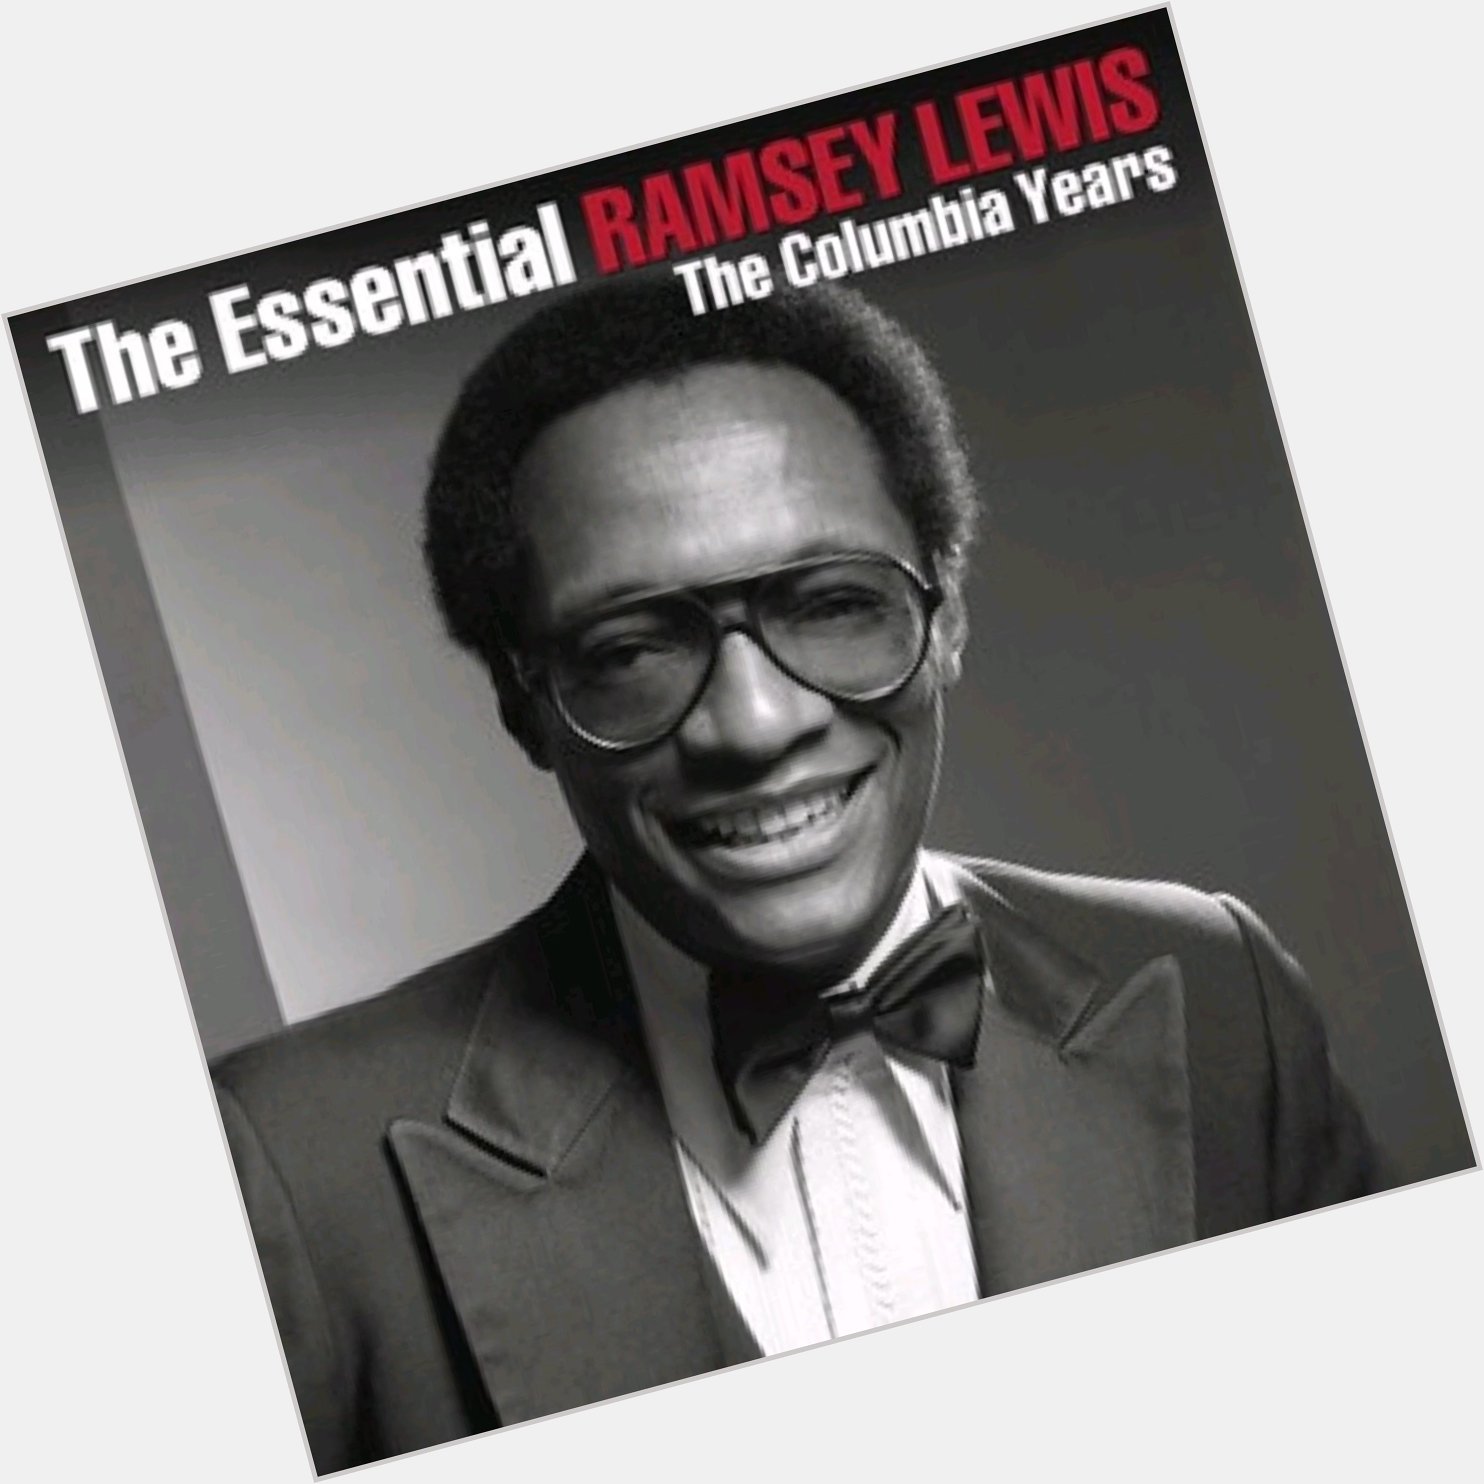 HAPPY BIRTHDAY RAMSEY LEWIS MAY 27TH 1935 